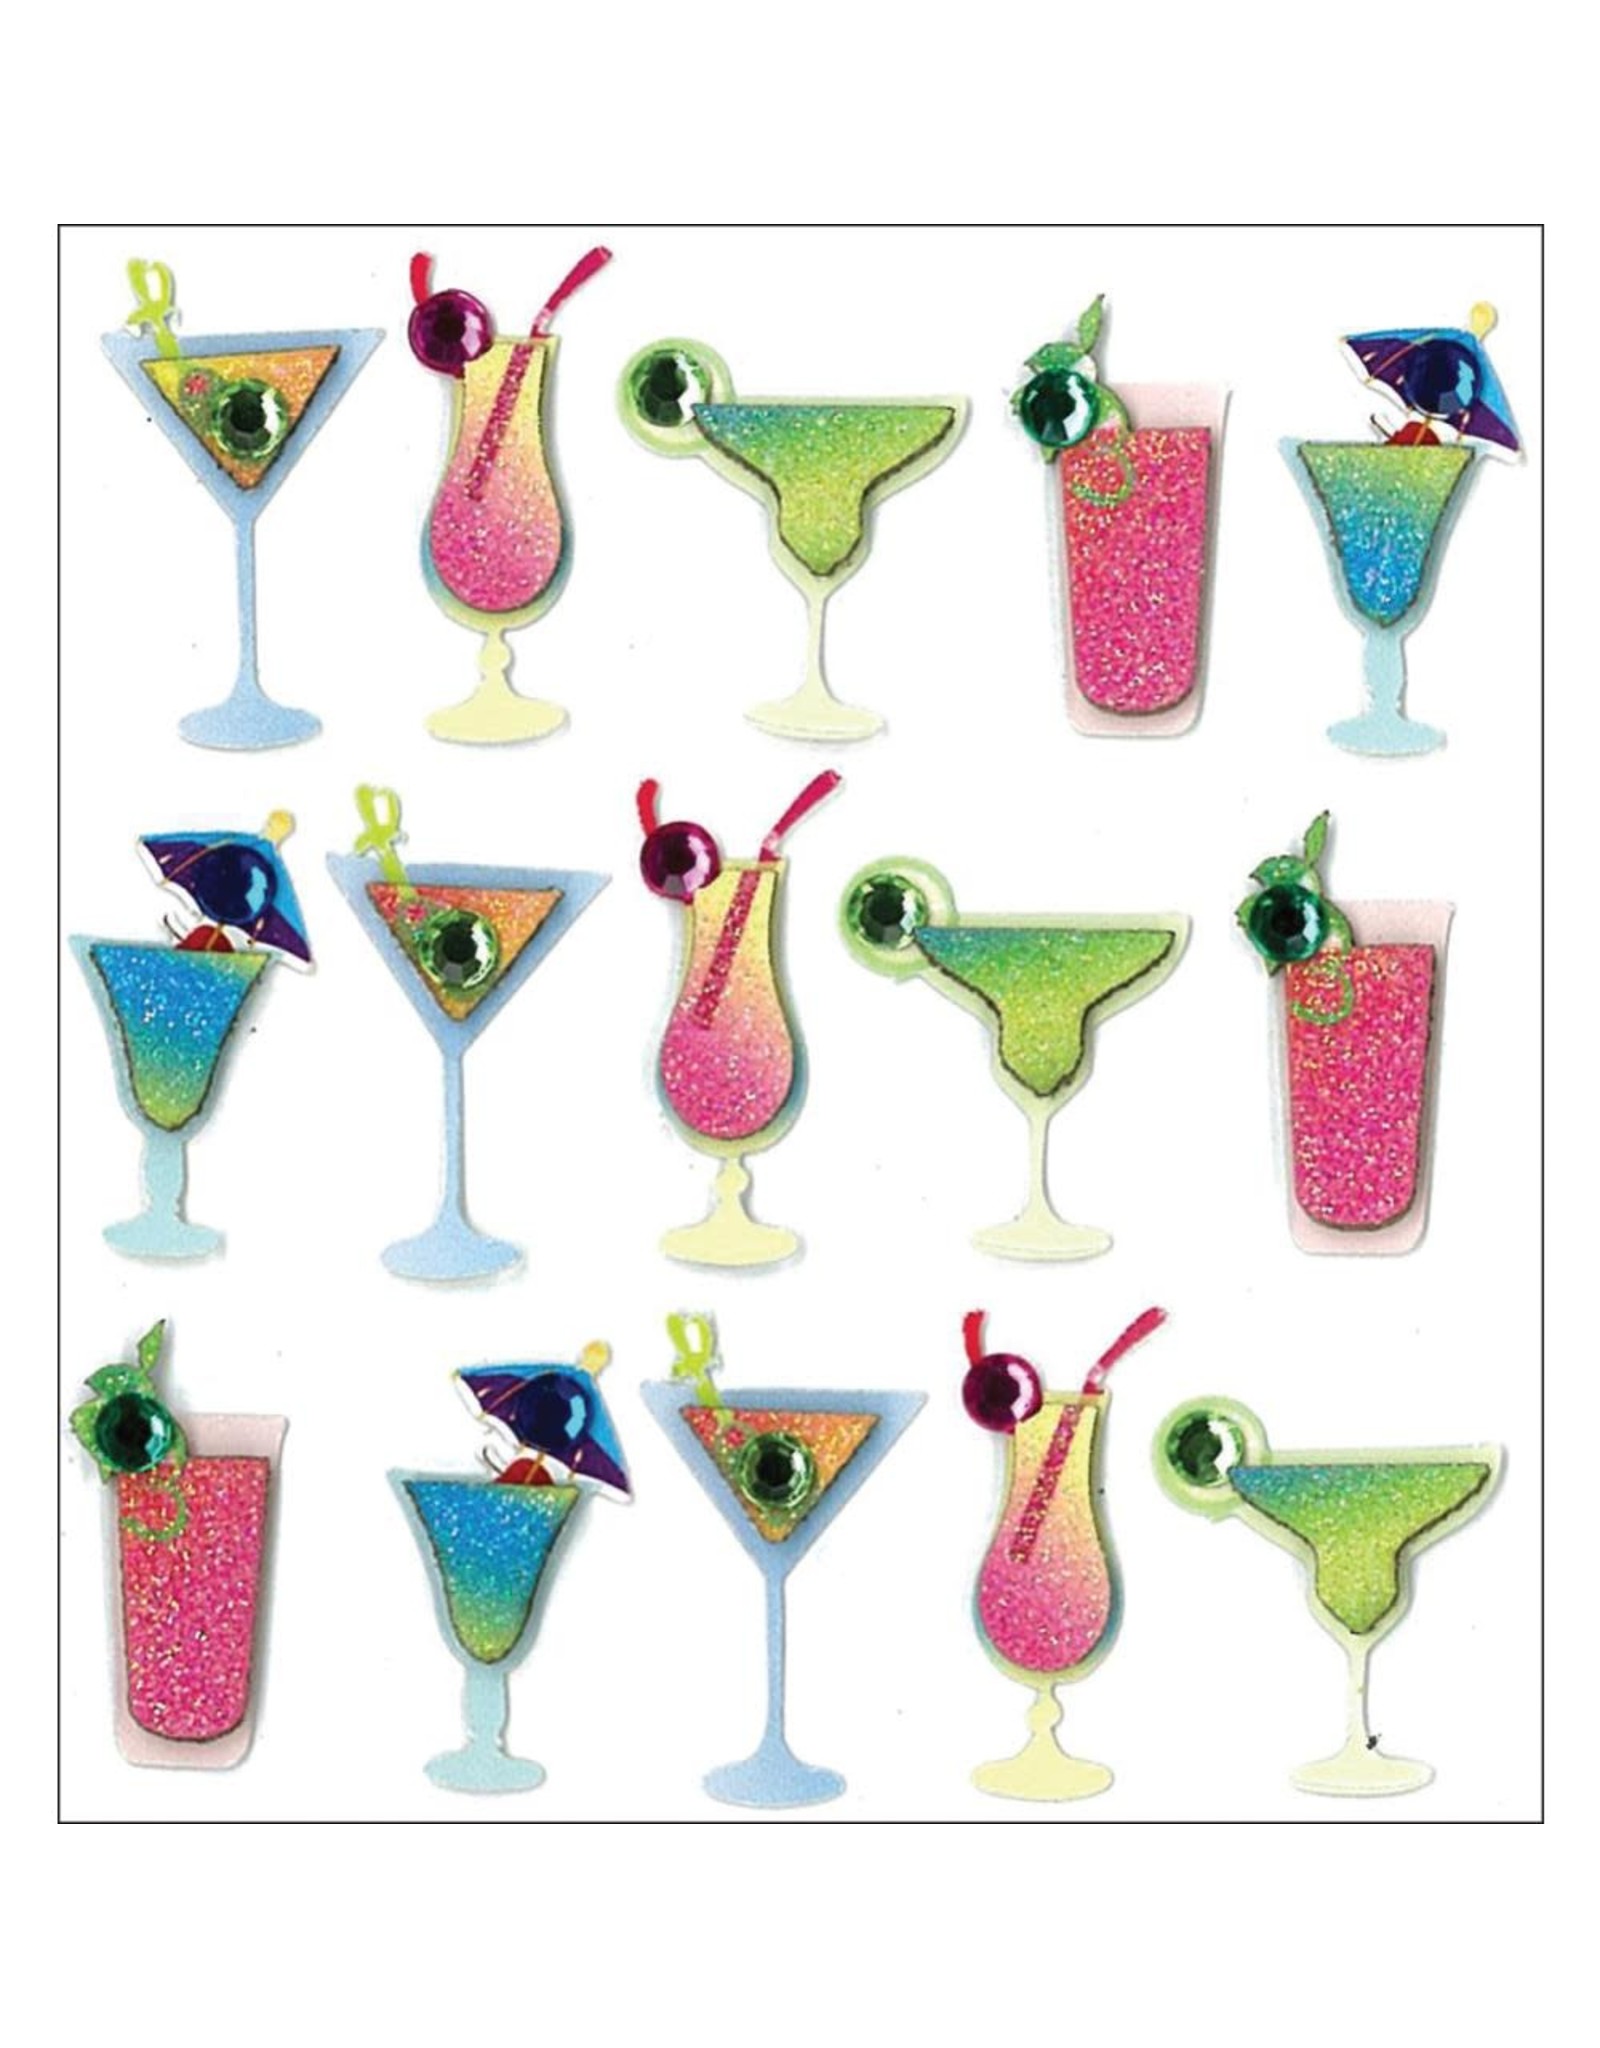 JOLEE’S JOLEE'S BOUTIQUE DRINK DIMENSIONAL REPEATS STICKERS